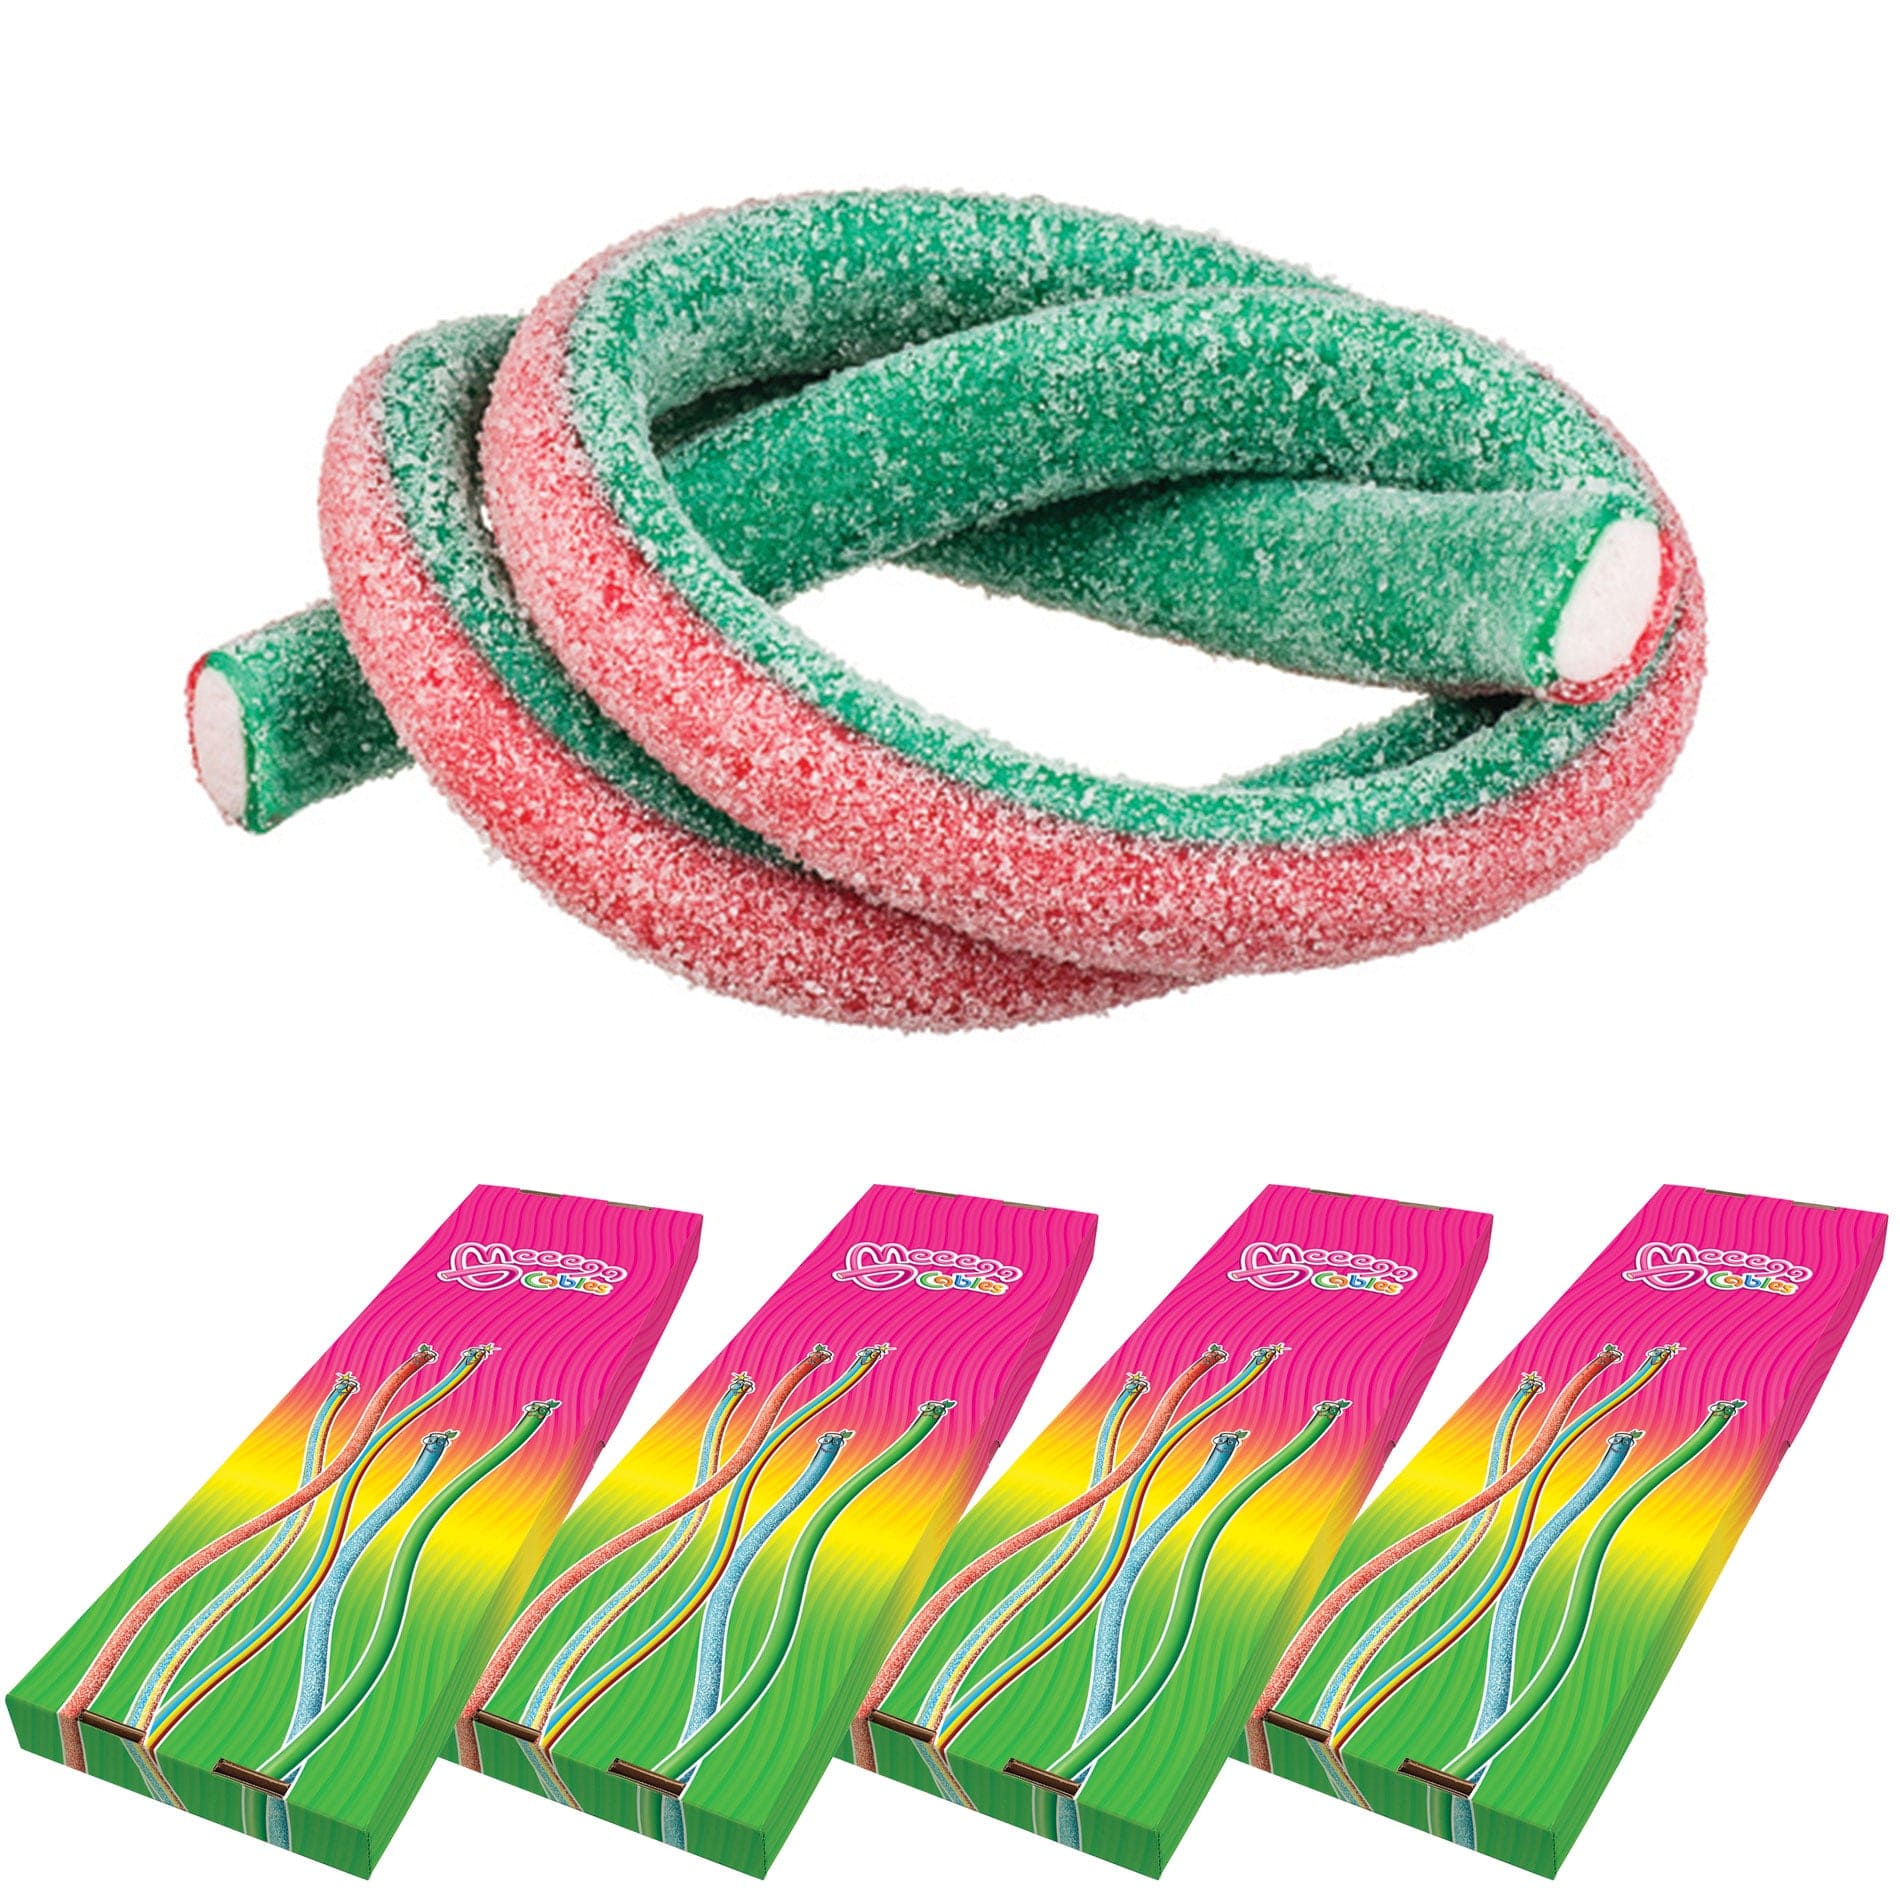 Novelty Concessions Gummy Rope SOUR WATERMELON STRAWBERRY / 4 Pack (120 pieces) Meeega Cables European Chewy Rope Candy - Box of 30 individually wrapped Meeega Cables, each over 2-feet long cups with lids and straws